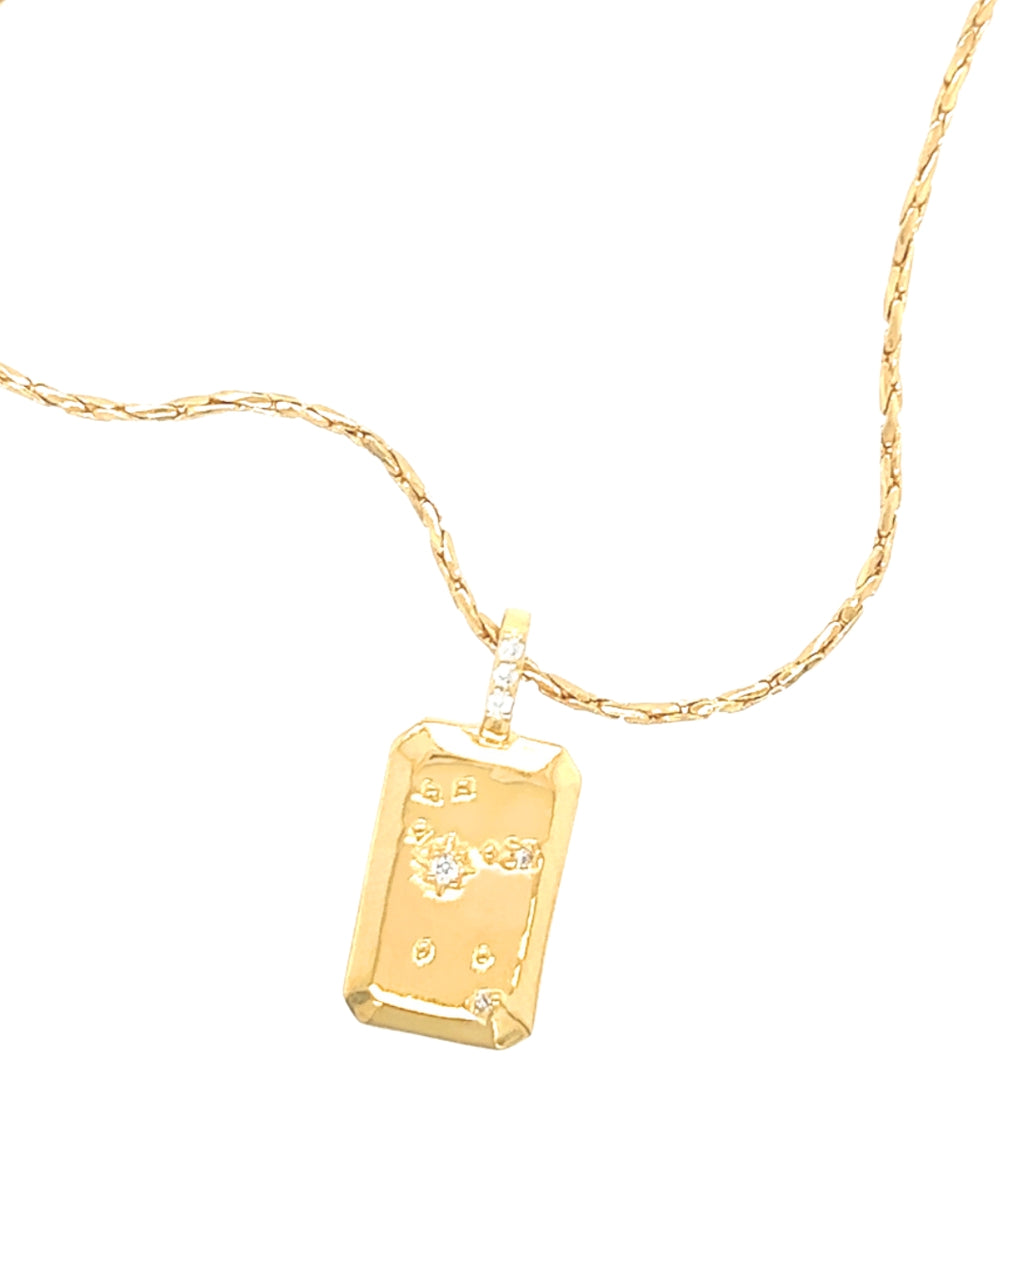 Gold Leo Constellation Zodiac Pendant on a Gold Necklace Chain